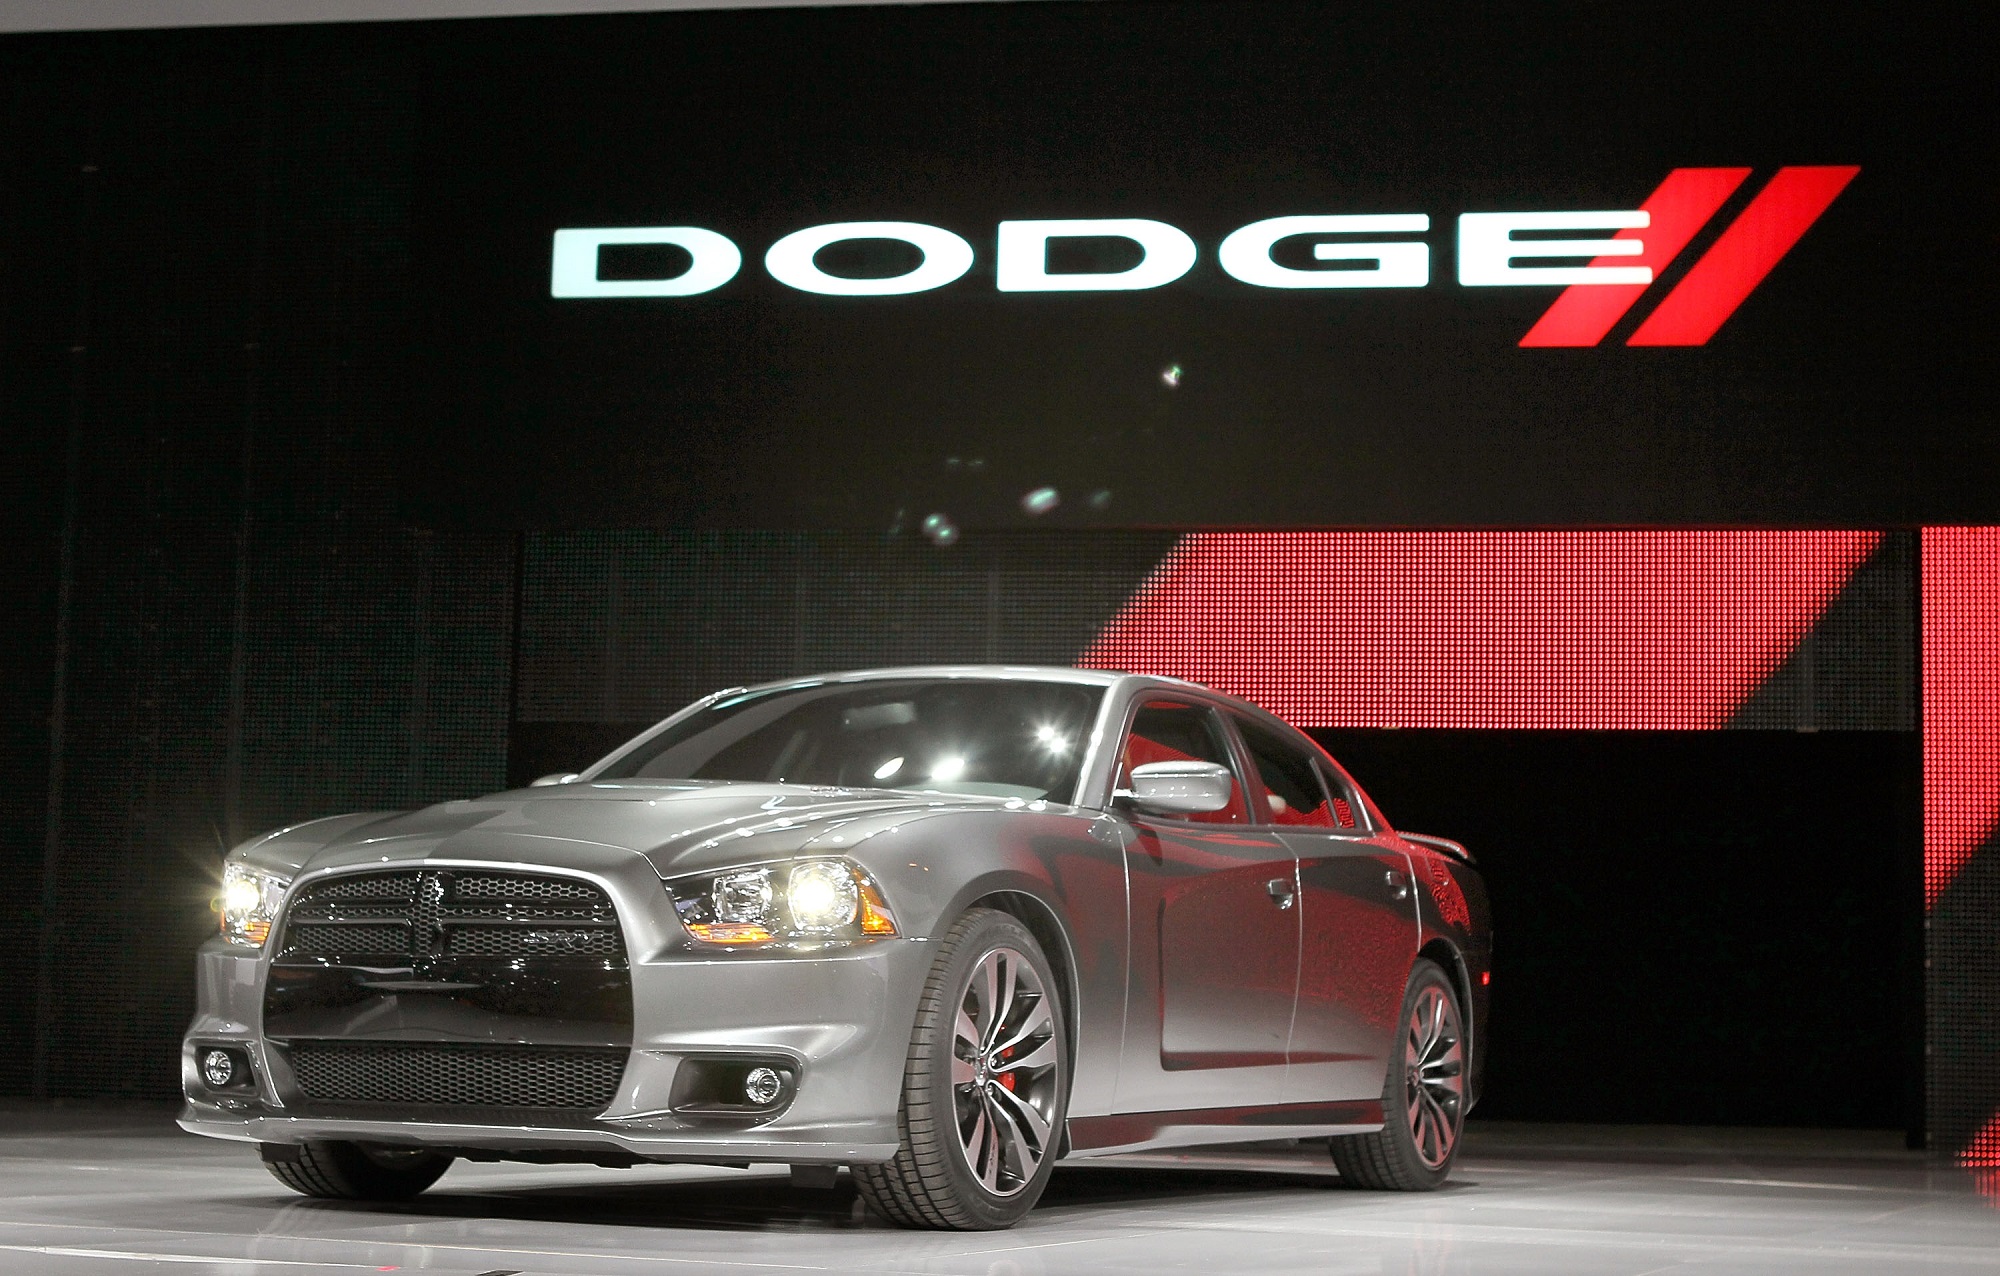 The Dodge Charger SRT8 is a performance bargain and one of the cheapest SRT cars you can buy.